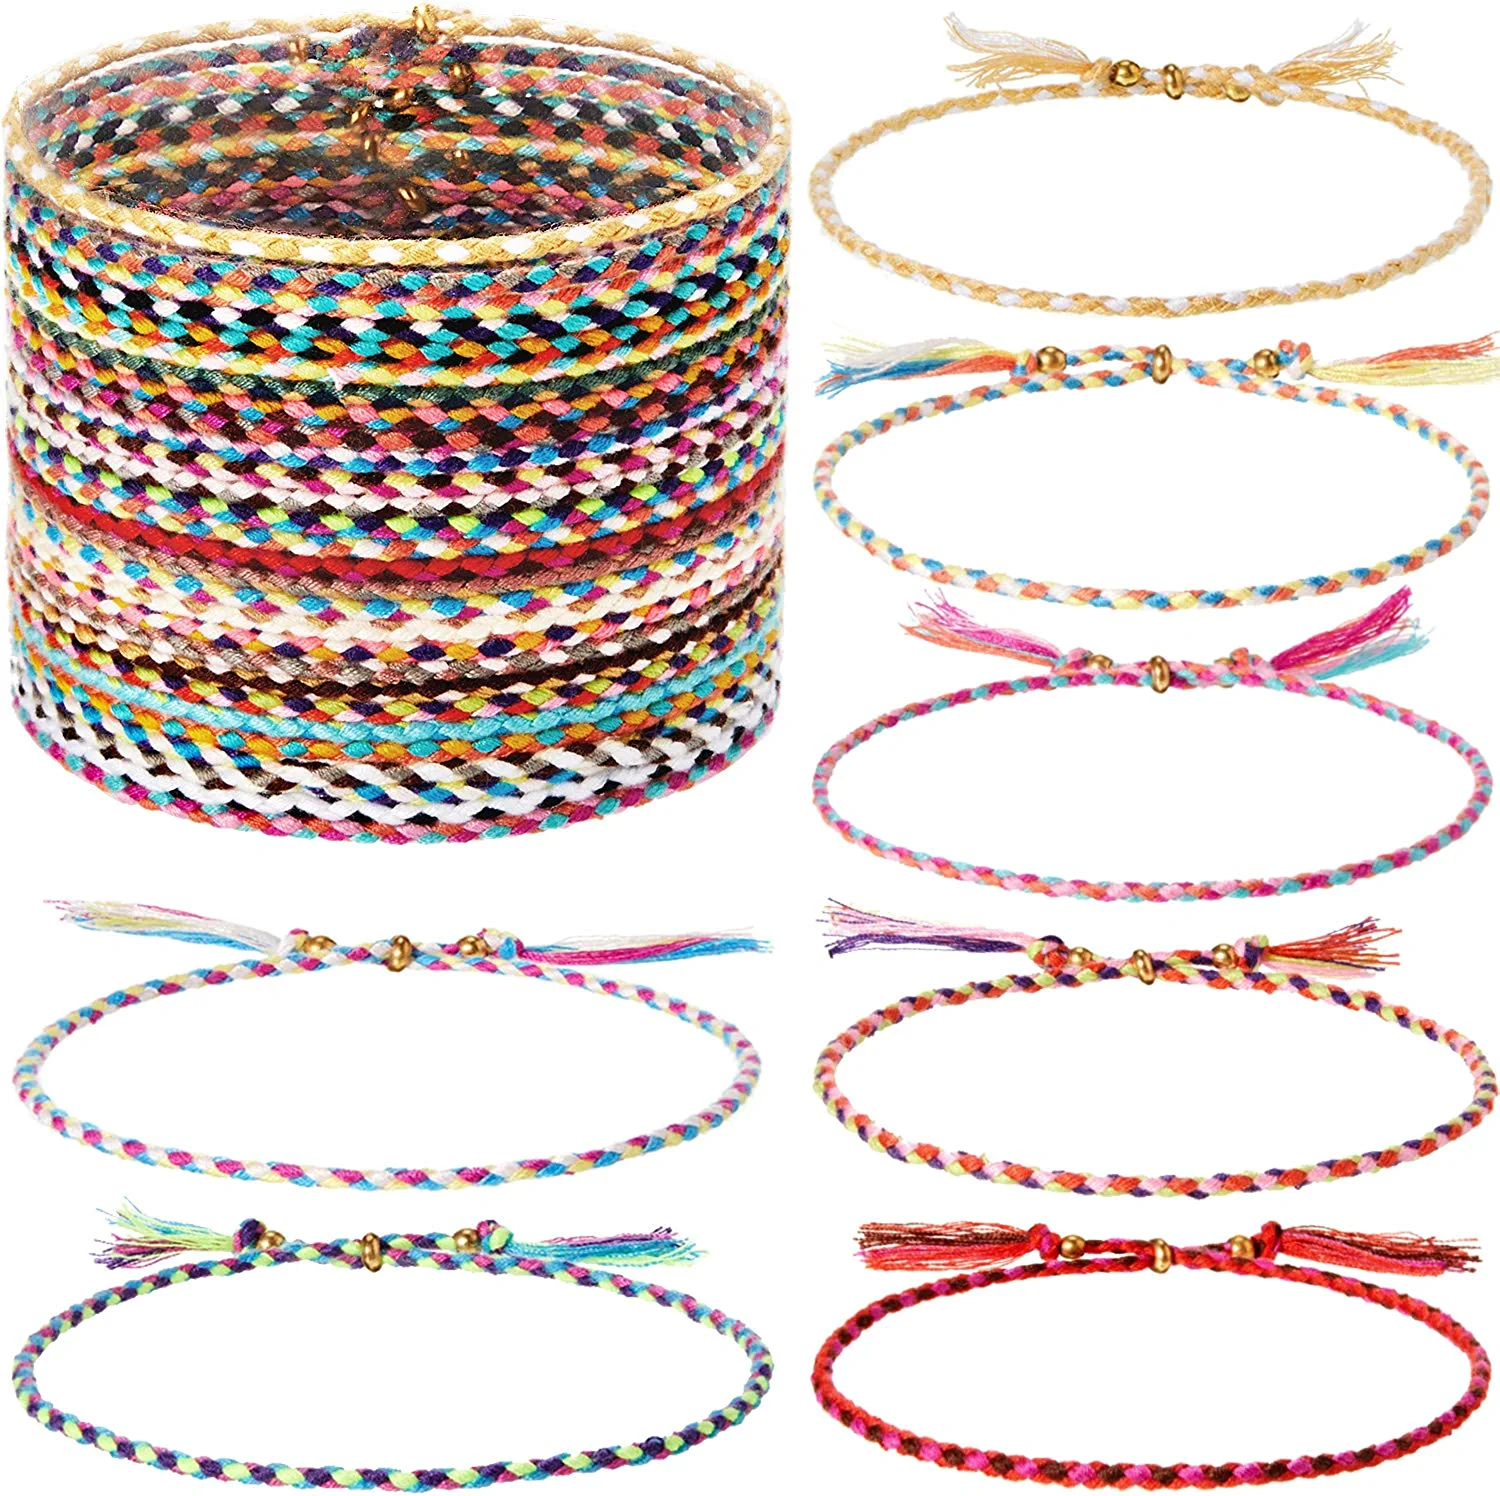 Native American Friendship Bracelets History and Purchase